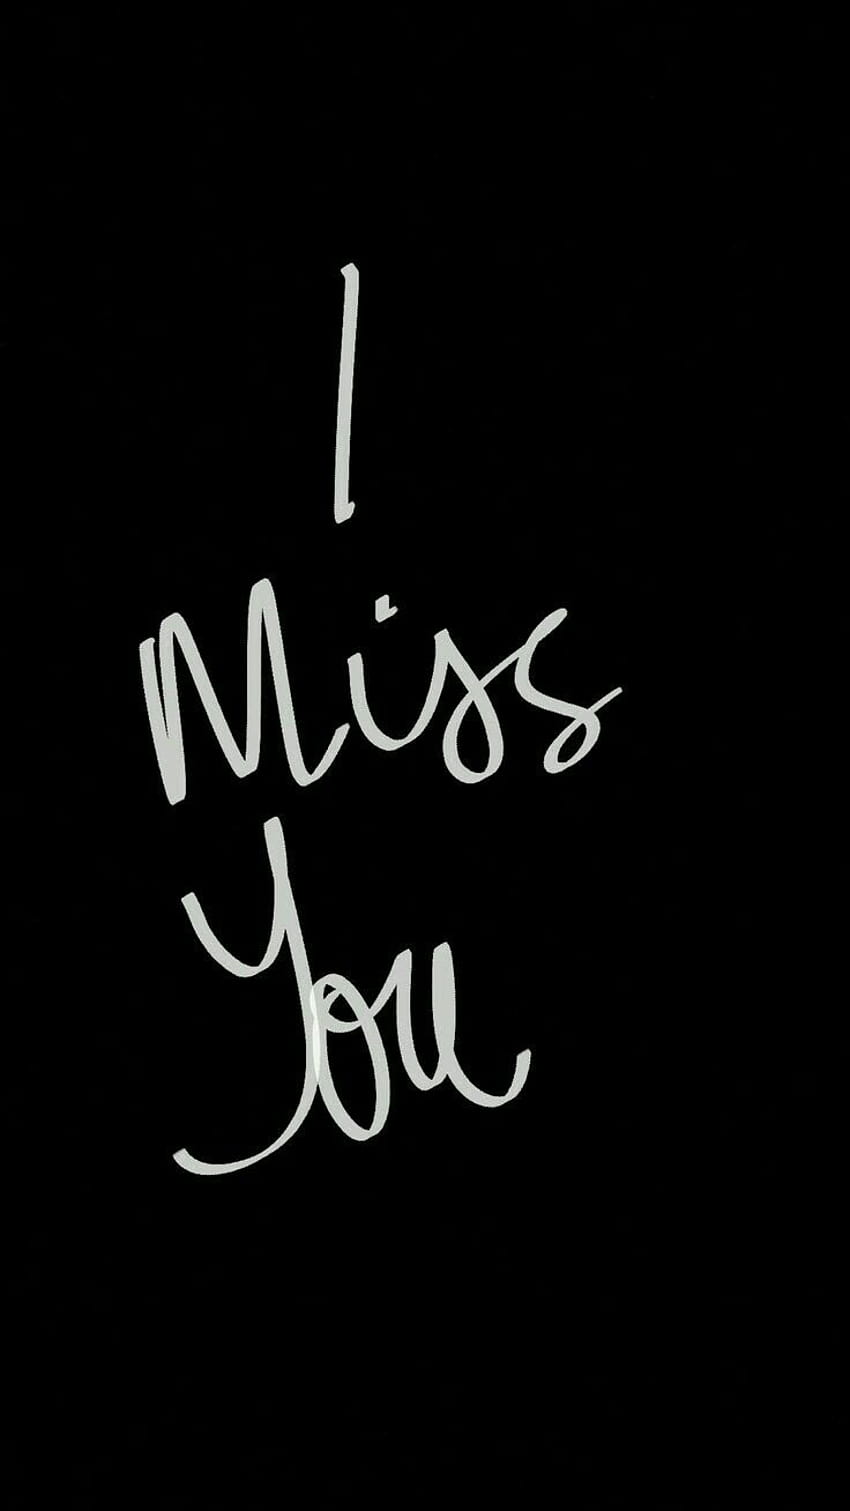 47 Miss You Wallpapers with Quotes  WallpaperSafari